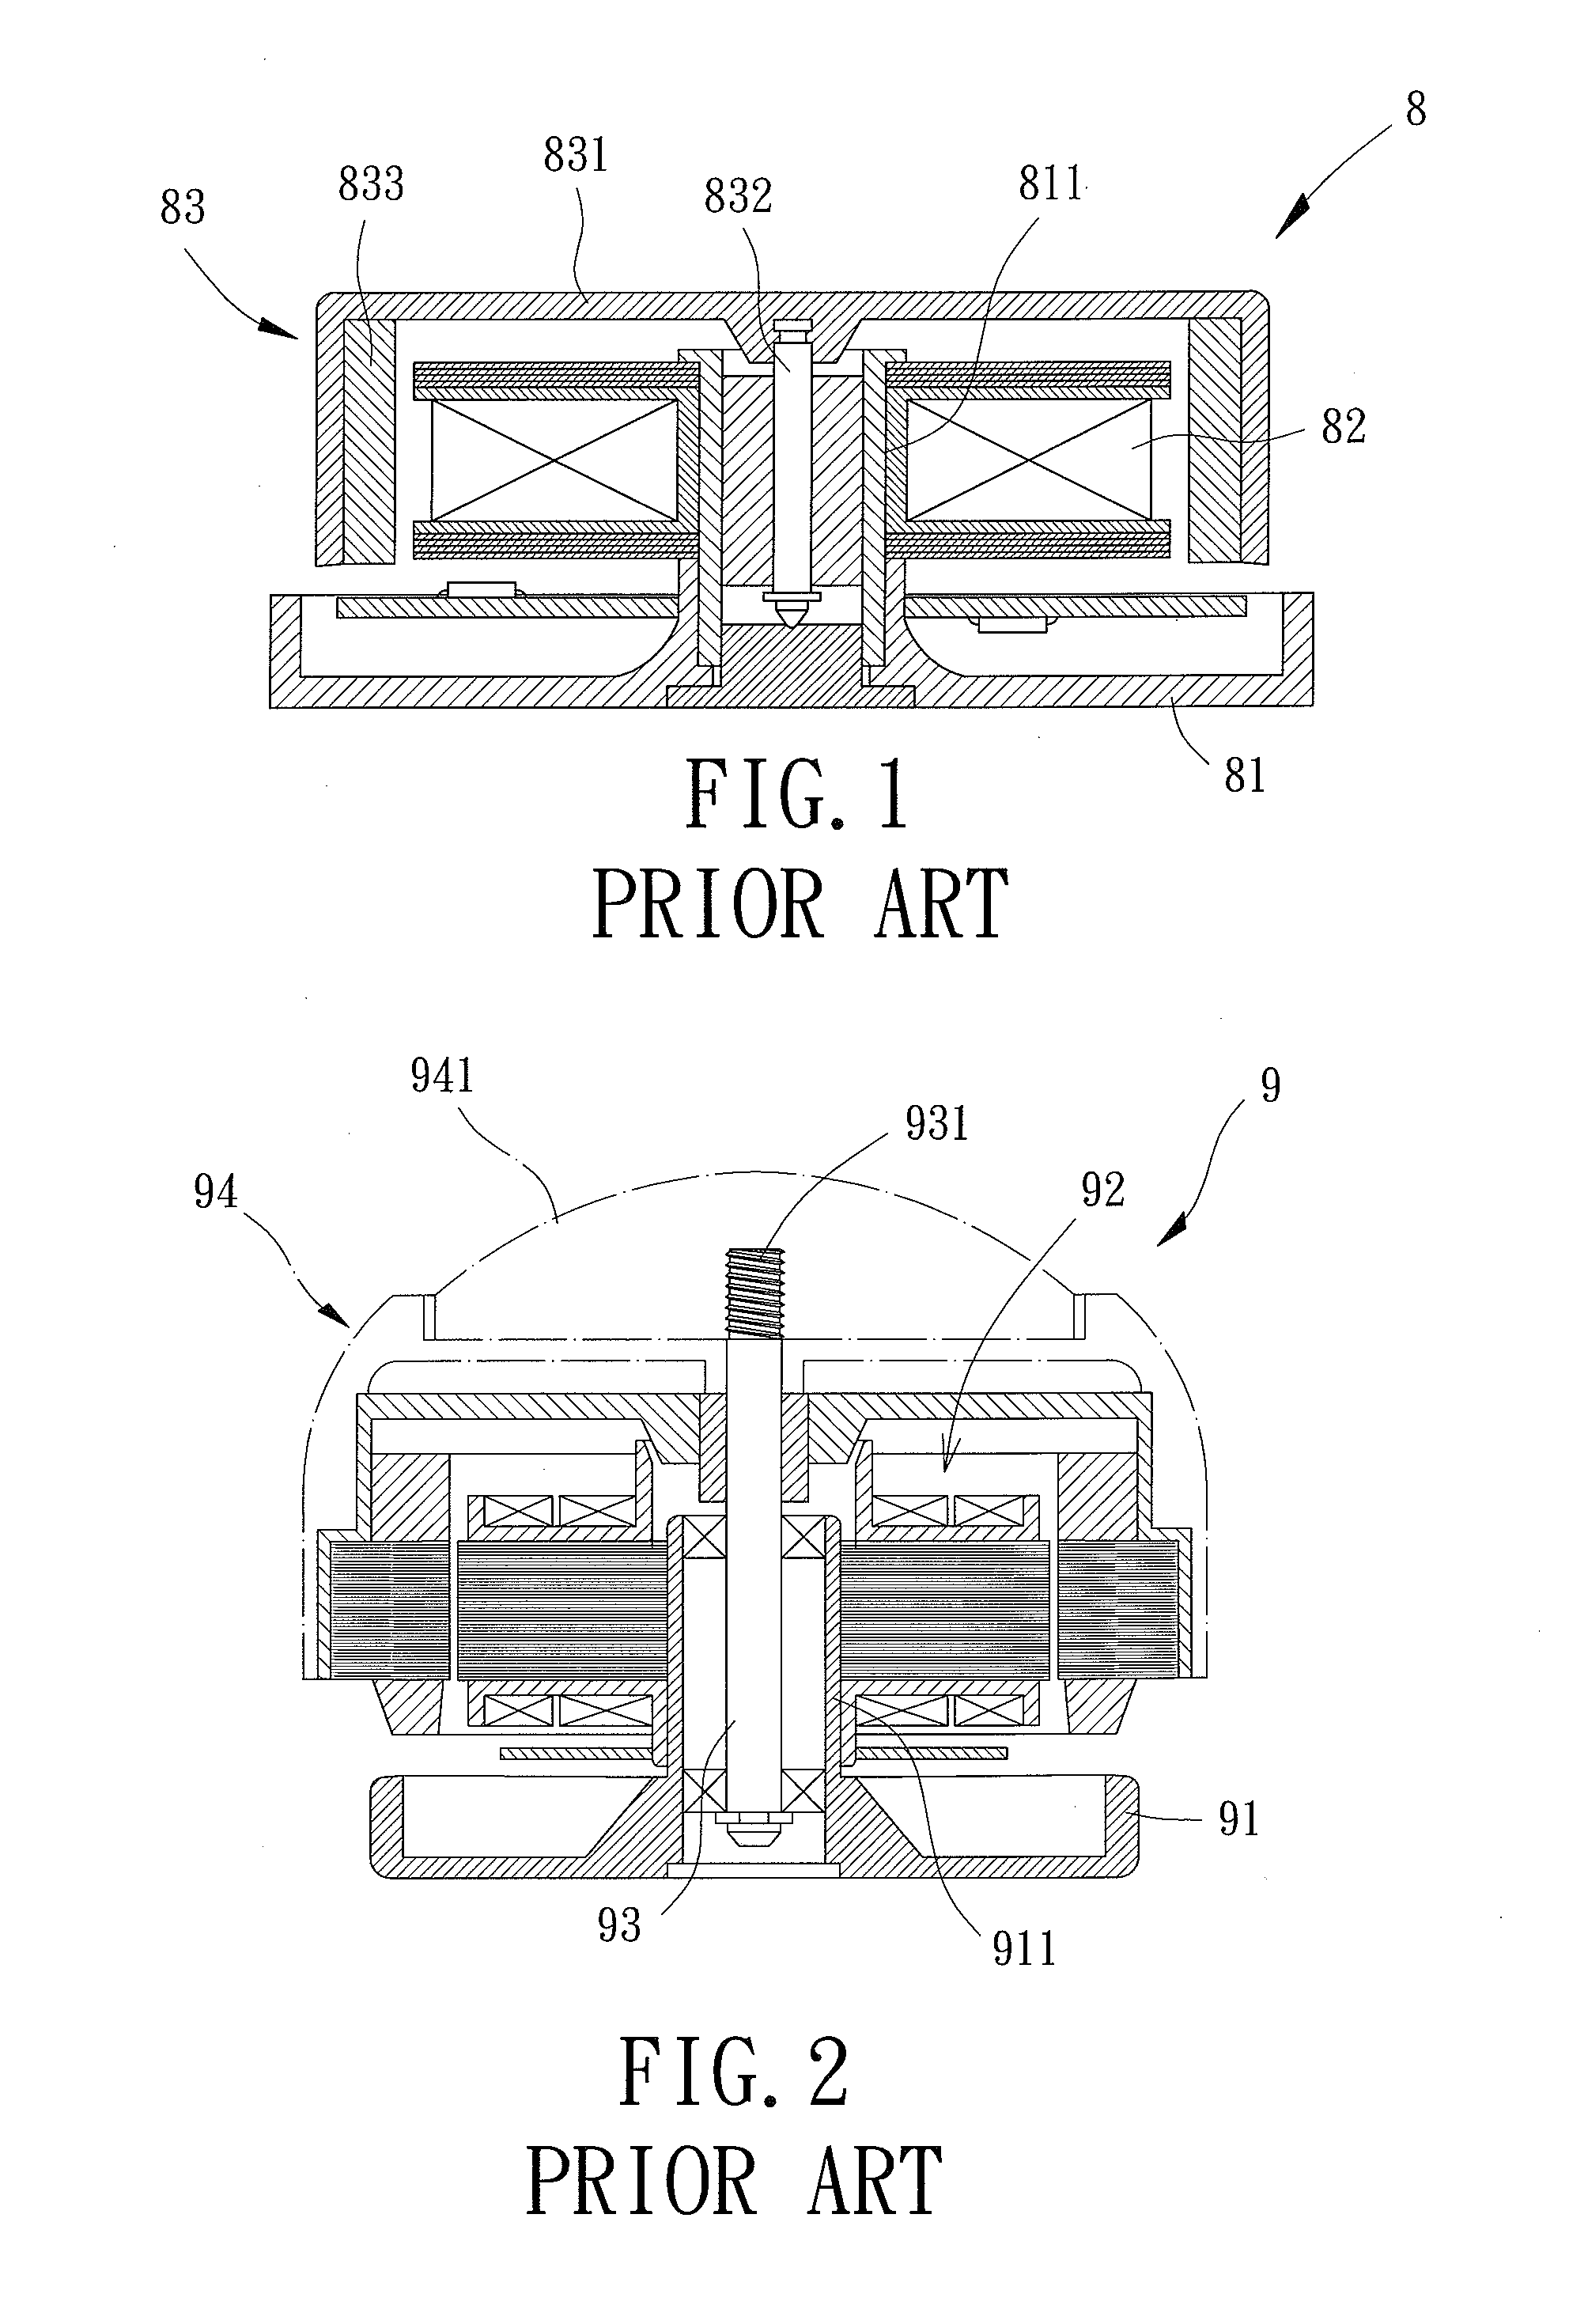 Rotating Part Assembly for Motor